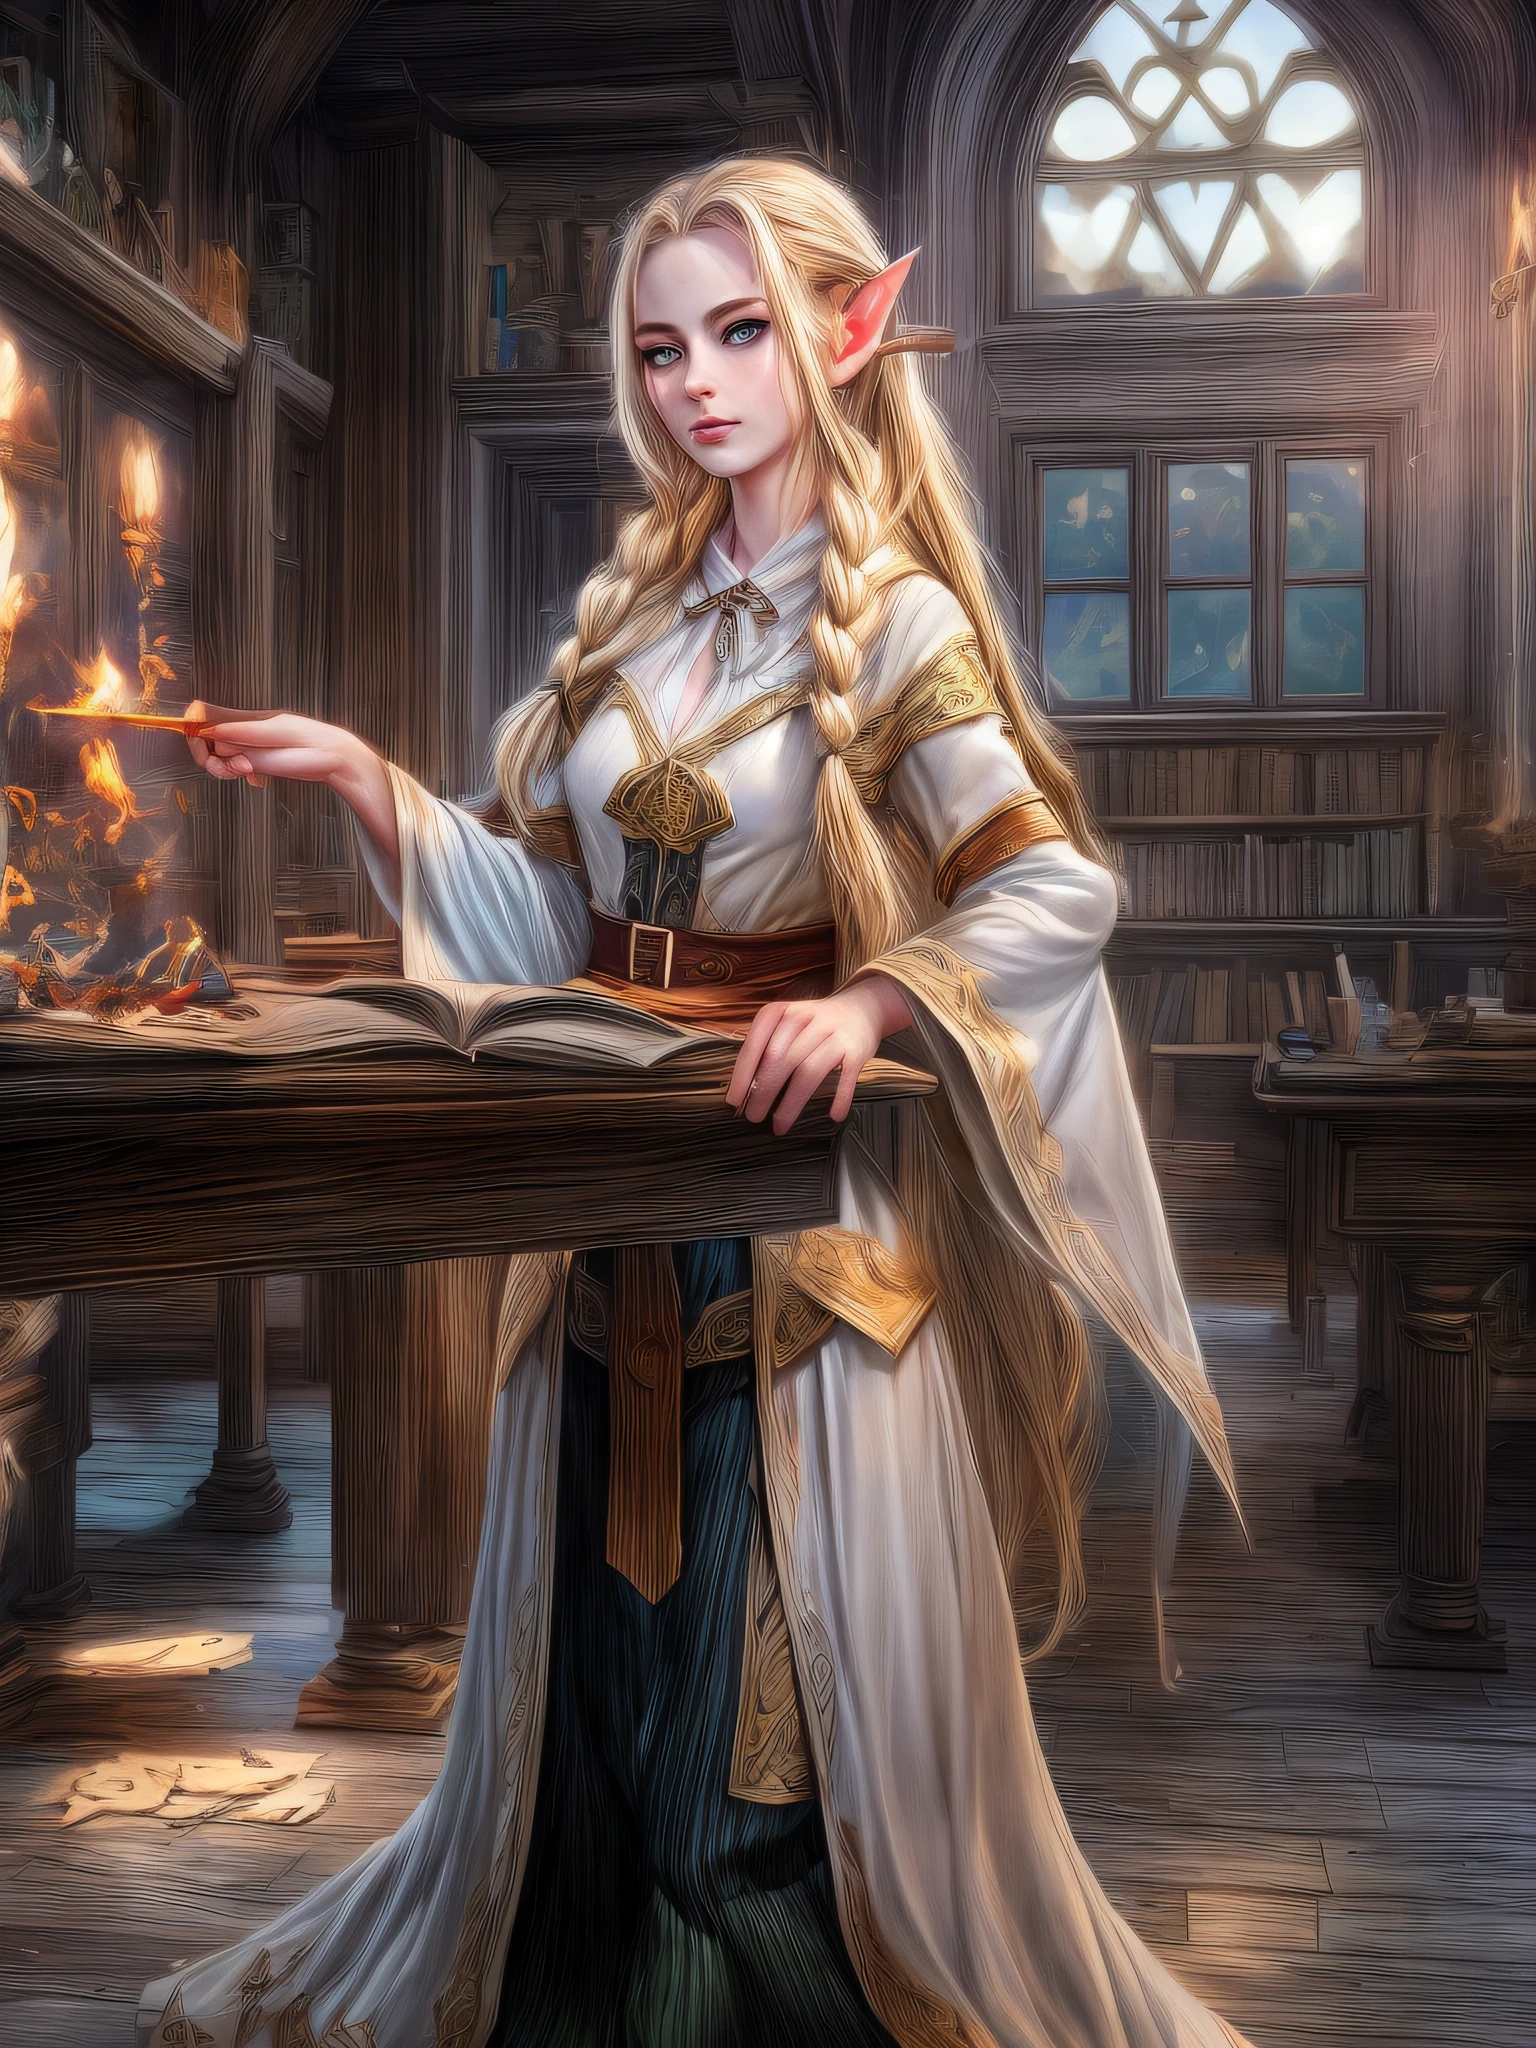 high details, best quality, 16k, [ultra detailed], masterpiece, best quality, (extremely detailed), ultra wide shot, photorealistic, a picture of an elf magical teacher (best details, Masterpiece, best quality: 1.5), teaching magical arts, manipulating magical fire Rune_Magic (((gl0w1ngR )))glowingrunes (best details, Masterpiece, best quality: 1.5) at fantasy classroom, a female elf, exquisite beauty (best details, Masterpiece, best quality: 1.5), ultra feminine (best details, Masterpiece, best quality: 1.5), full body (best details, Masterpiece, best quality: 1.5) golden hair, hair in a long braid, small pointed ears, dynamic eyes color, wearing a teachers robe, standing in the classroom (best details, Masterpiece, best quality: 1.5), fantasy class background, best realistic, best details, best quality, 16k, [ultra detailed], masterpiece, best quality, (extremely detailed), ultra wide shot, photorealism, room is lit with bright light, depth of field,